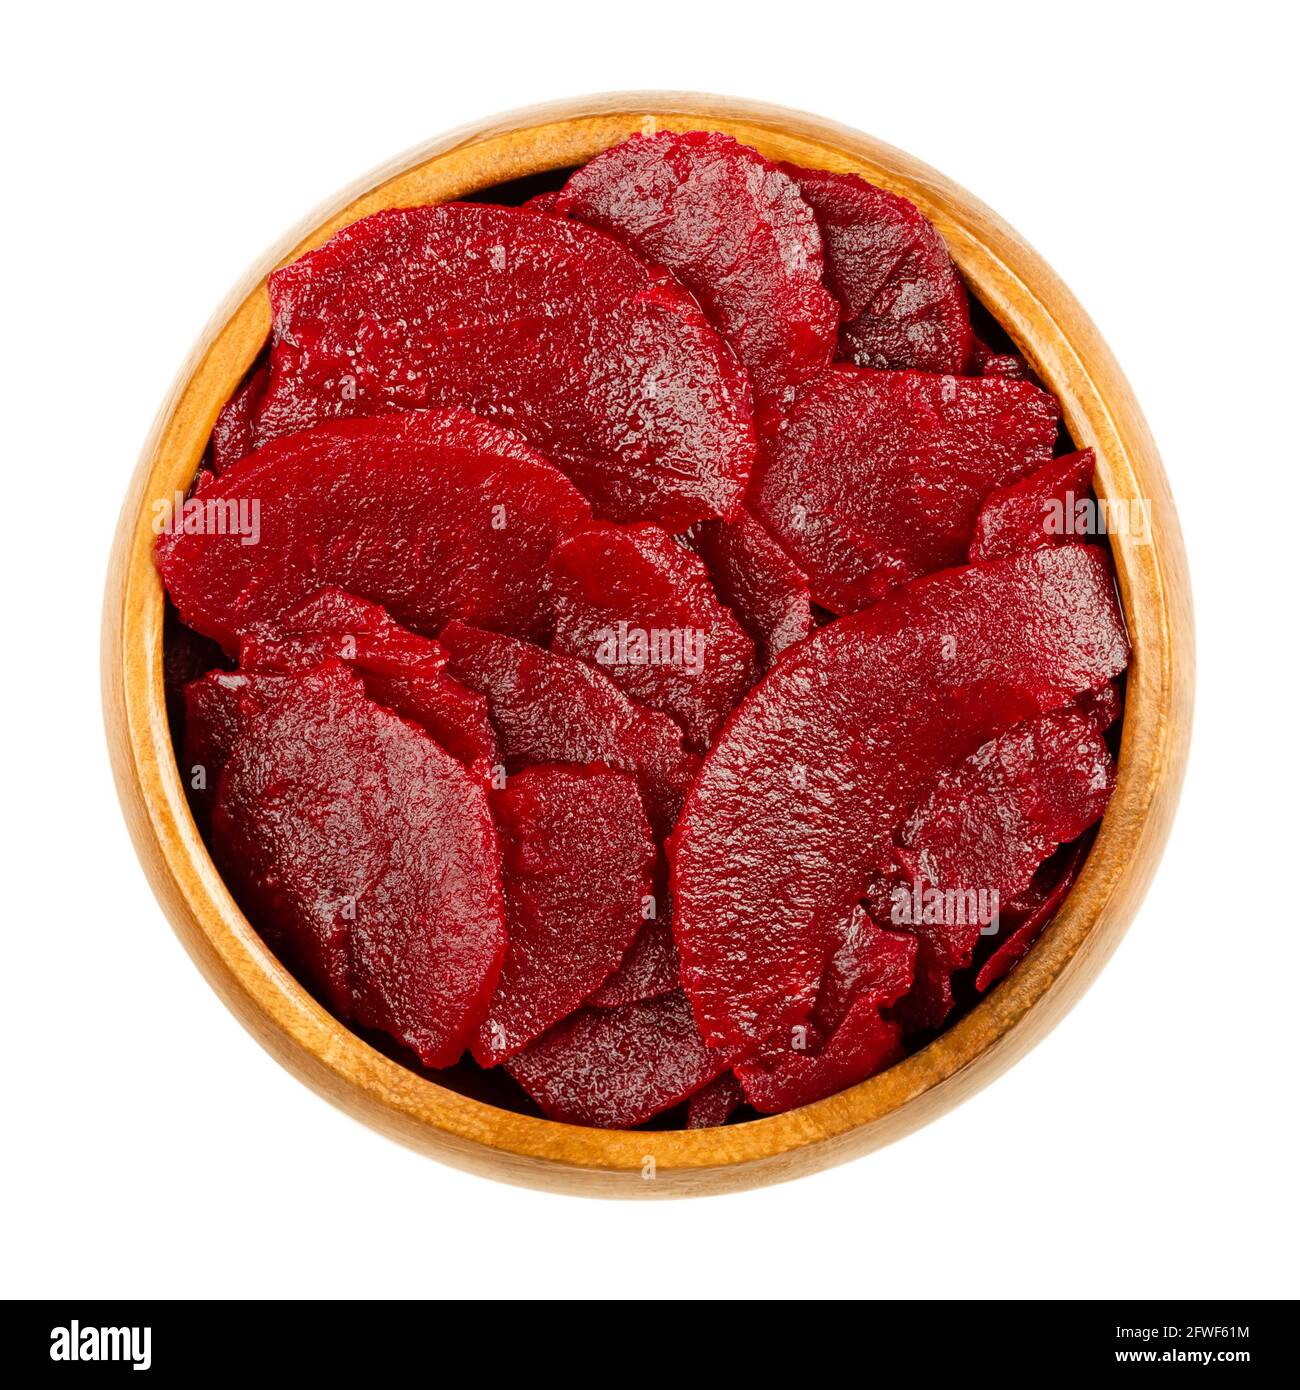 Sliced pickled beetroot slices, in a wooden bowl. Cooked, cut and preserved deep red beets, used as salad or added to a meal. Close-up, from above. Stock Photo